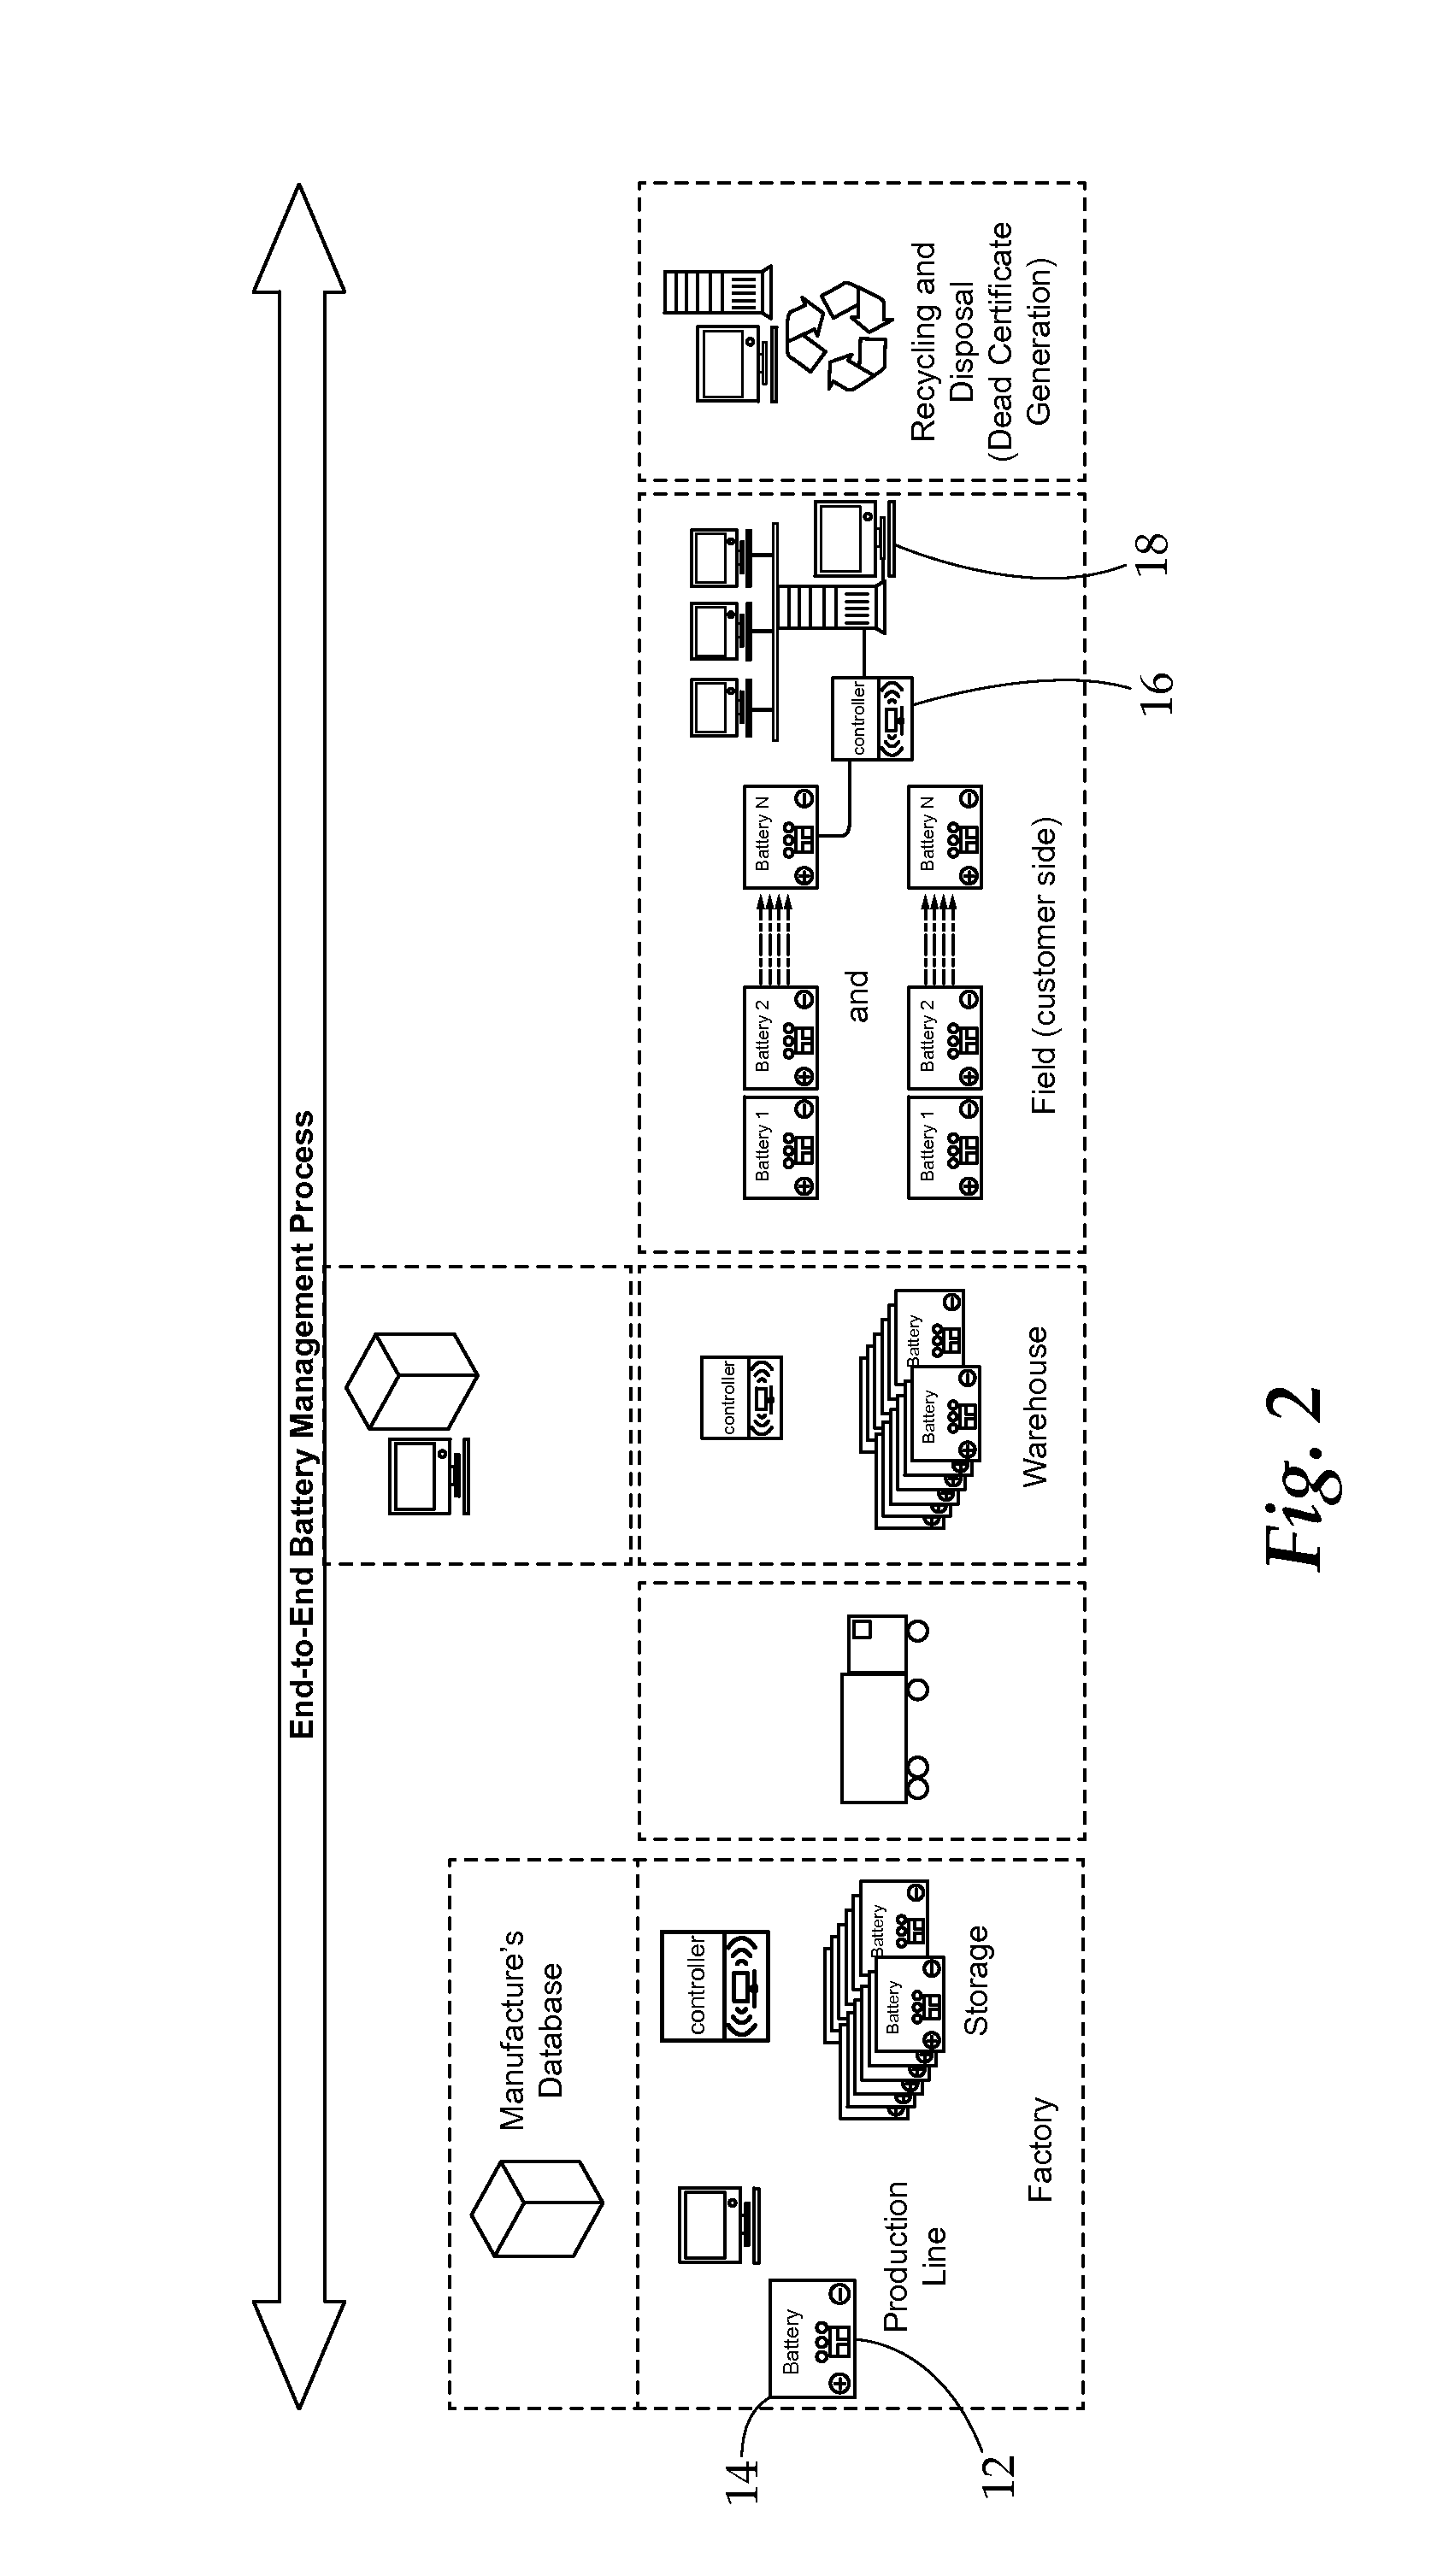 Integrated Intelligent Battery Management System and Monitoring System